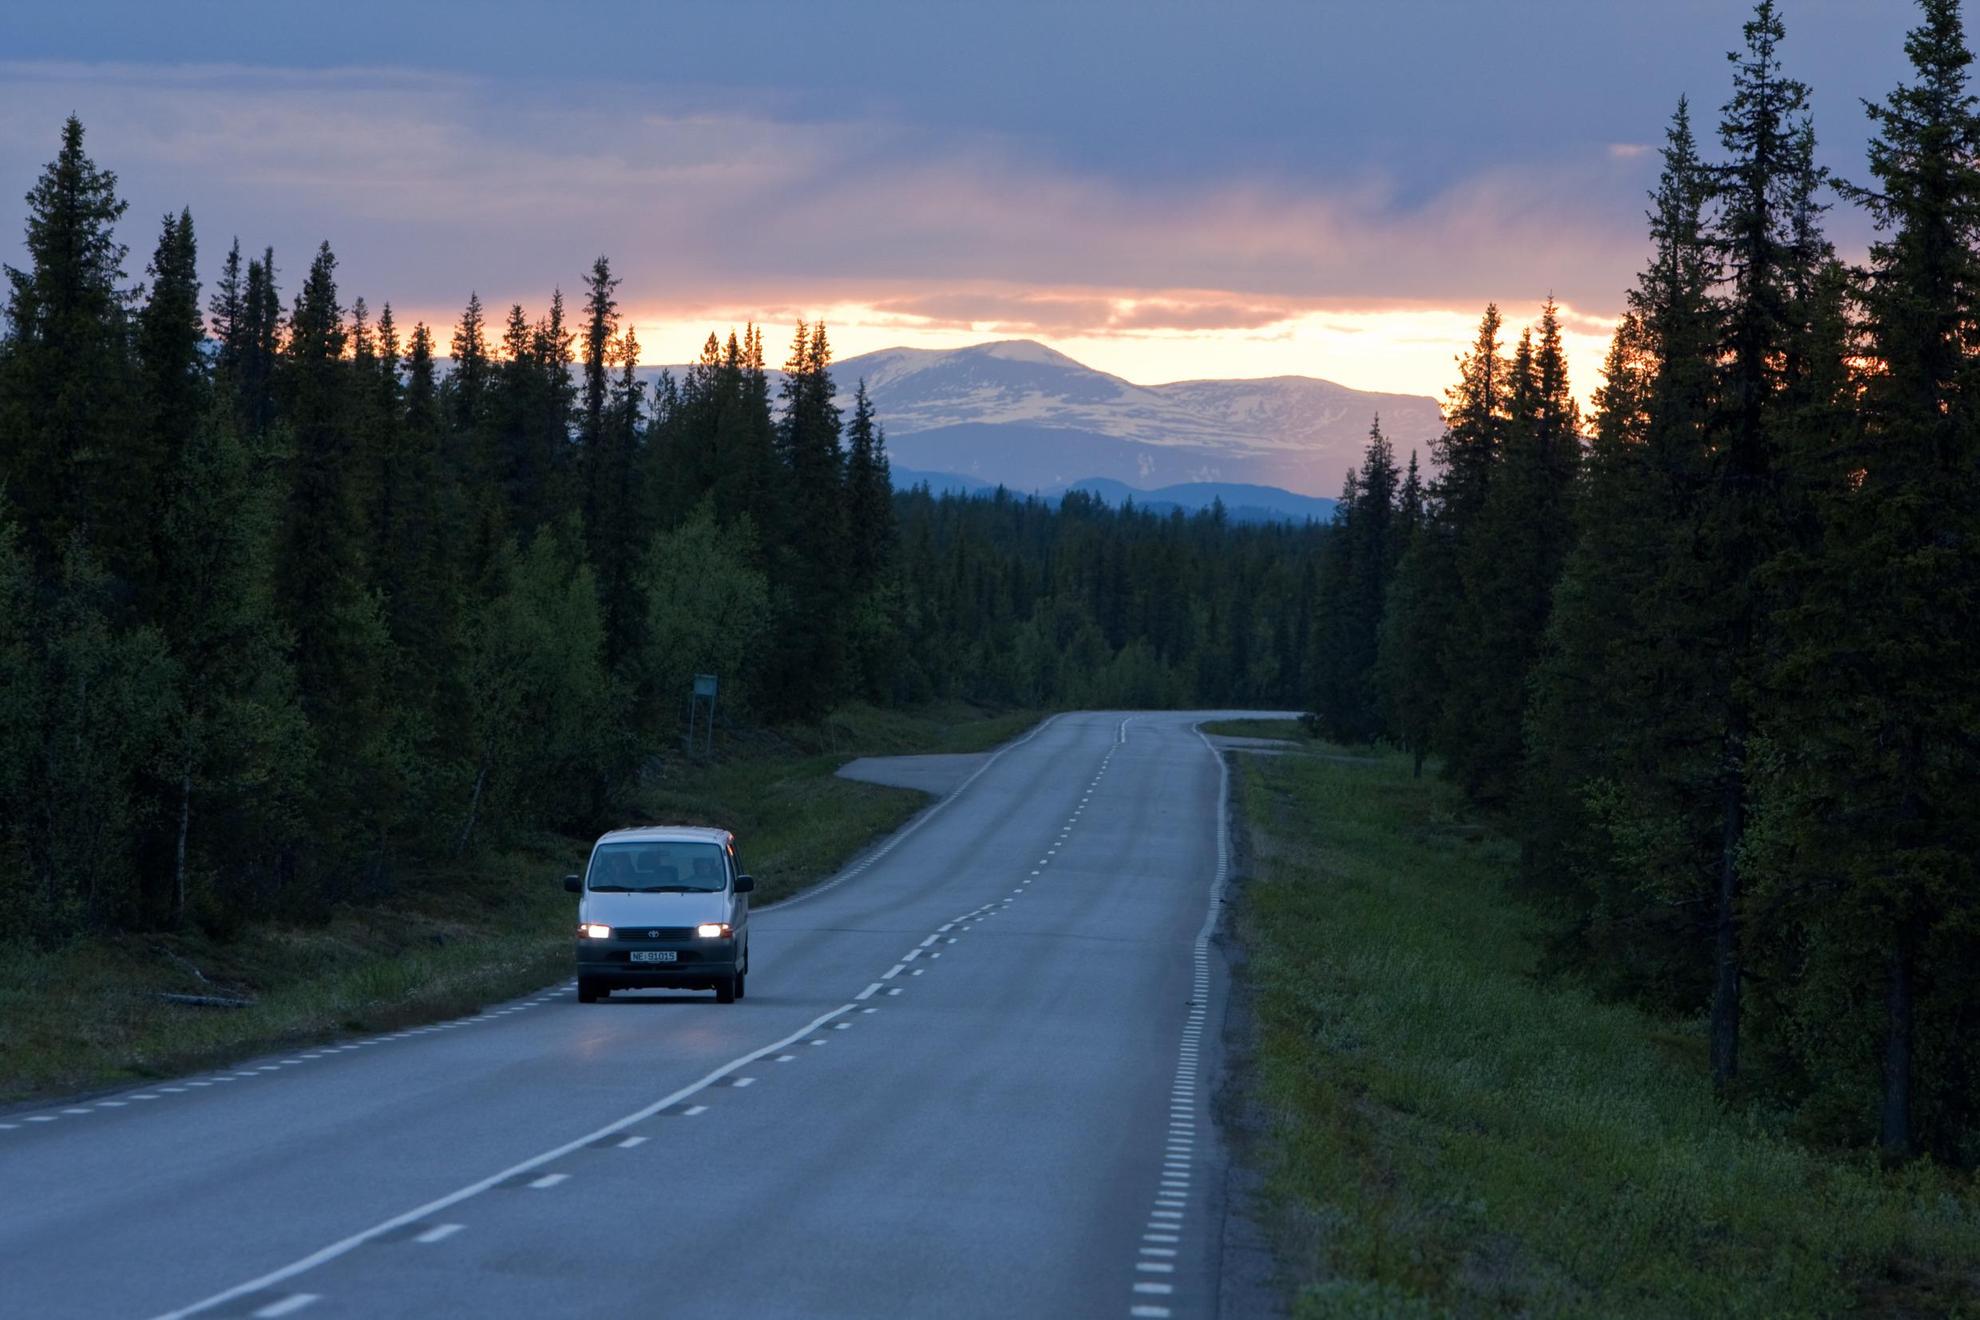 A minivan is driving along a road during the midnight sun in northern Sweden, forests on both sides and mountains in the background.